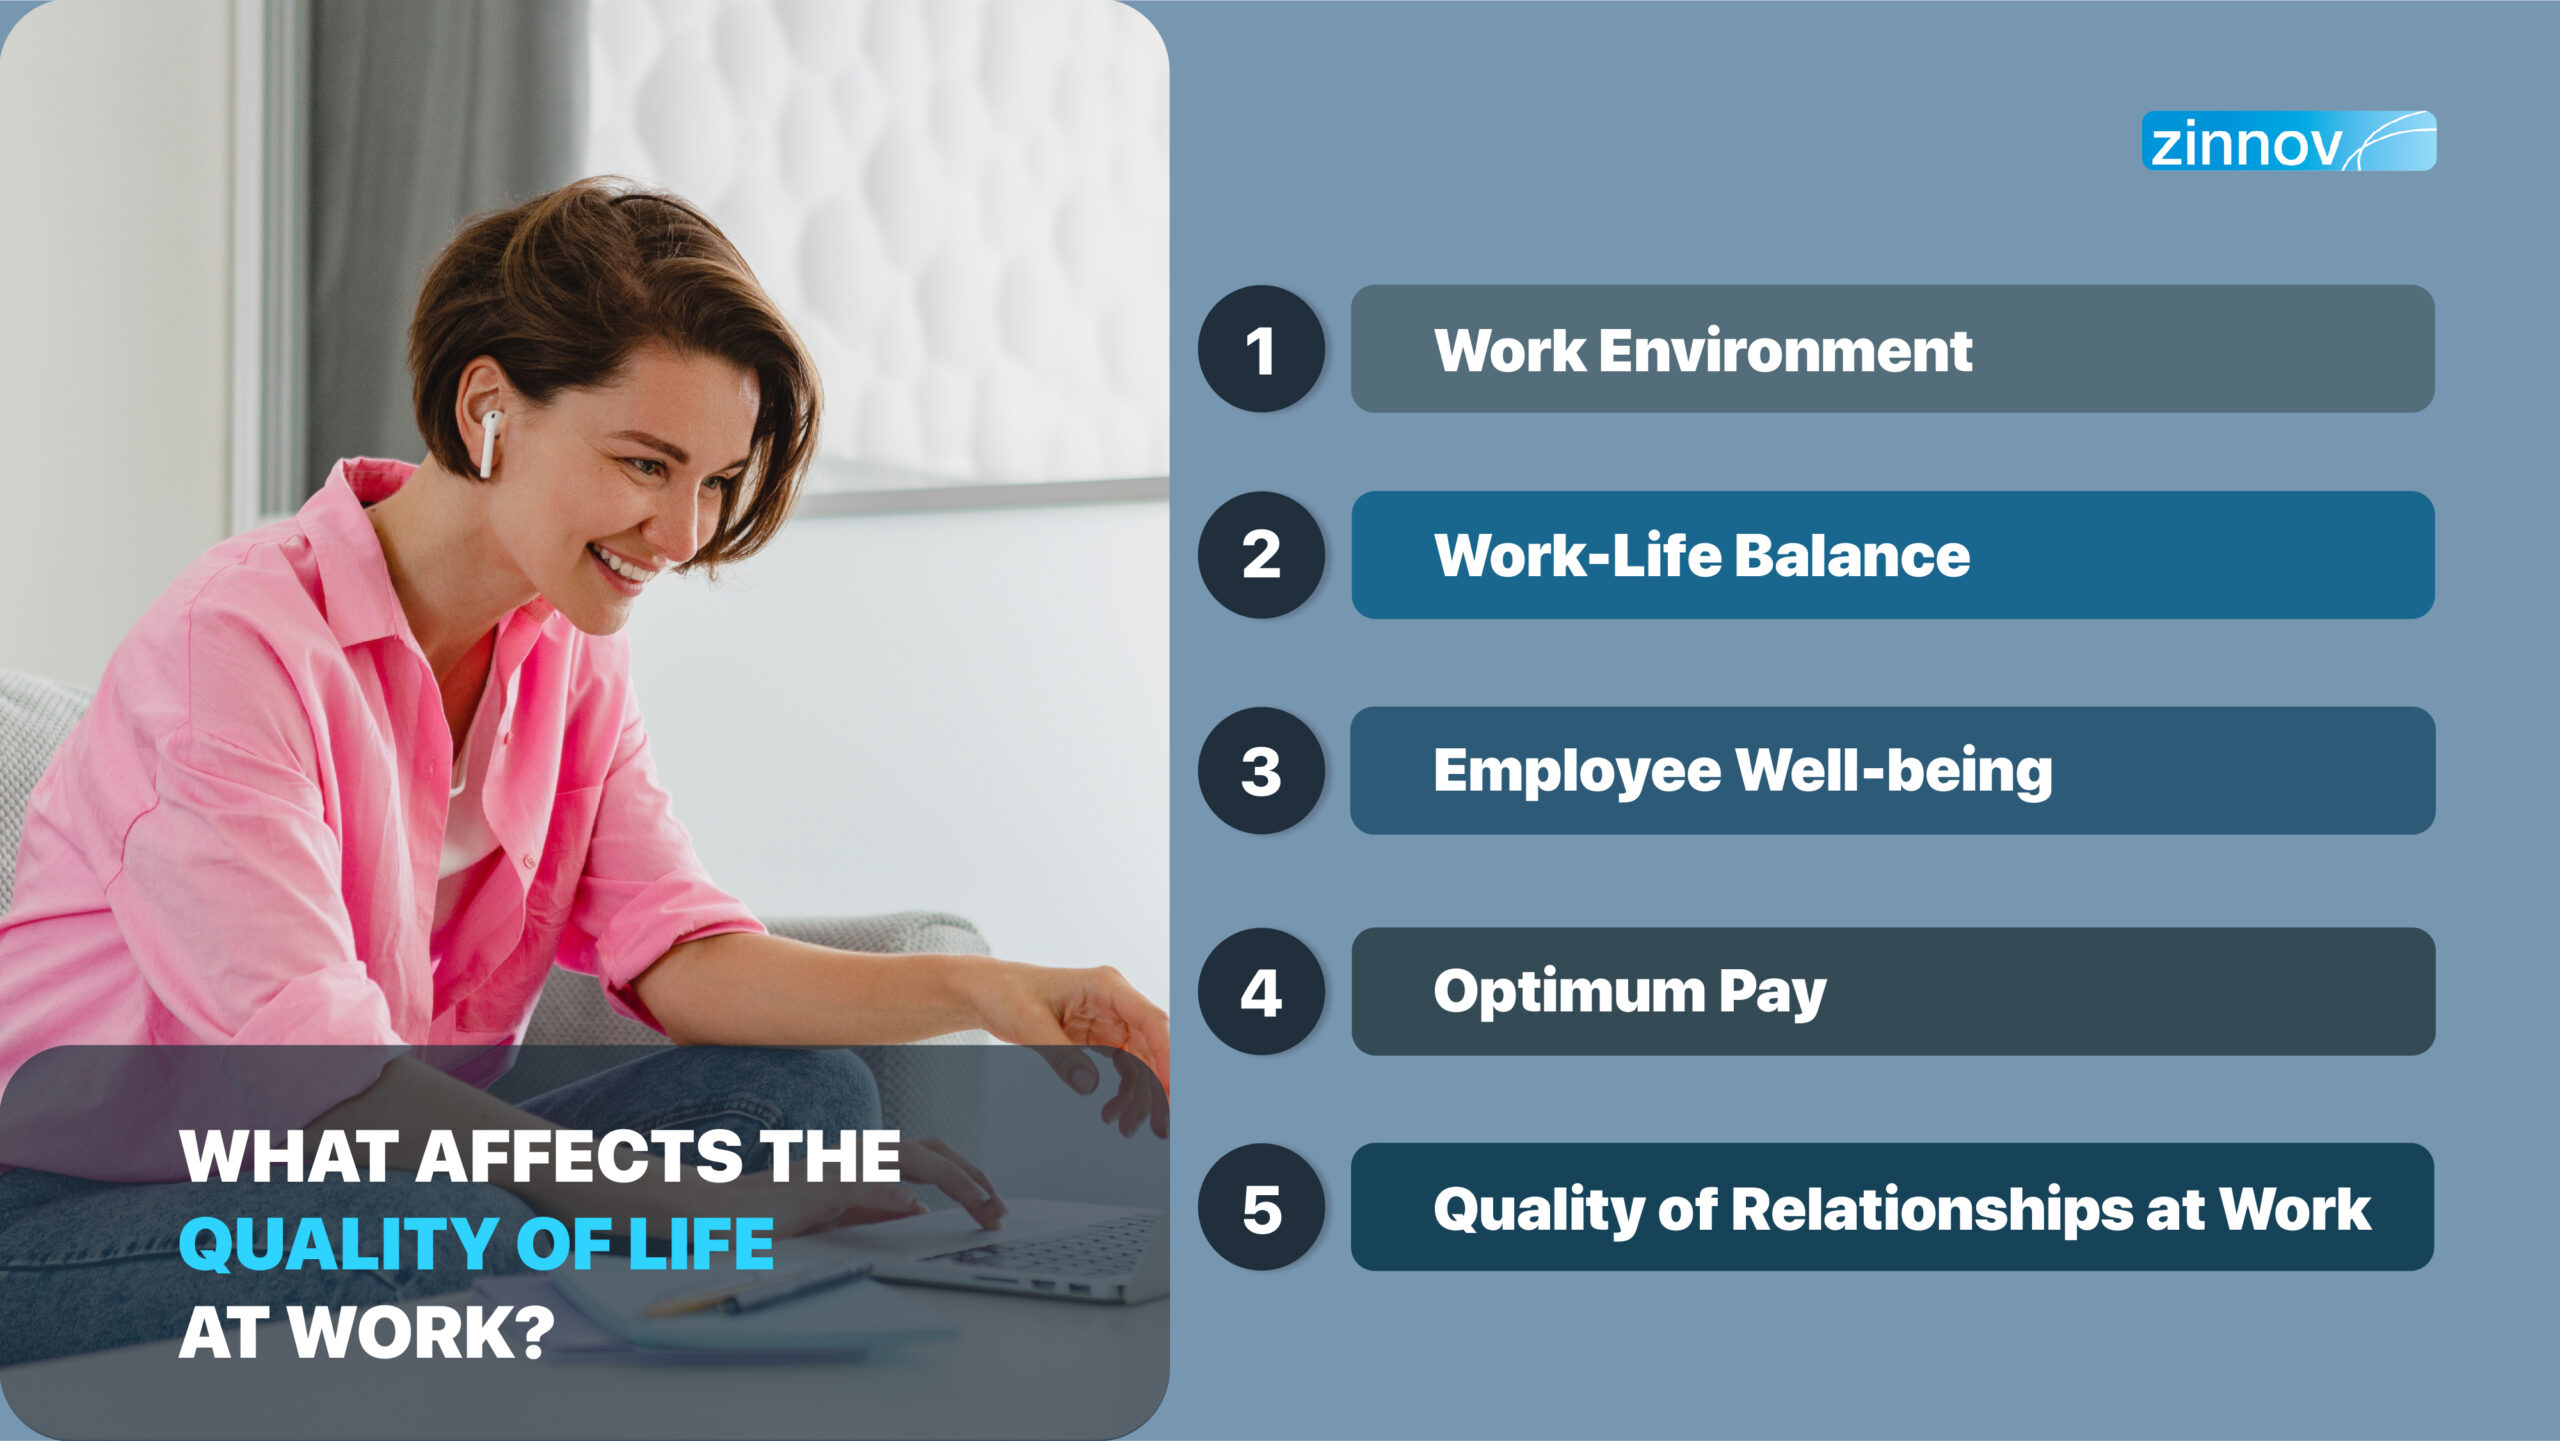 What affects the quality of life at work